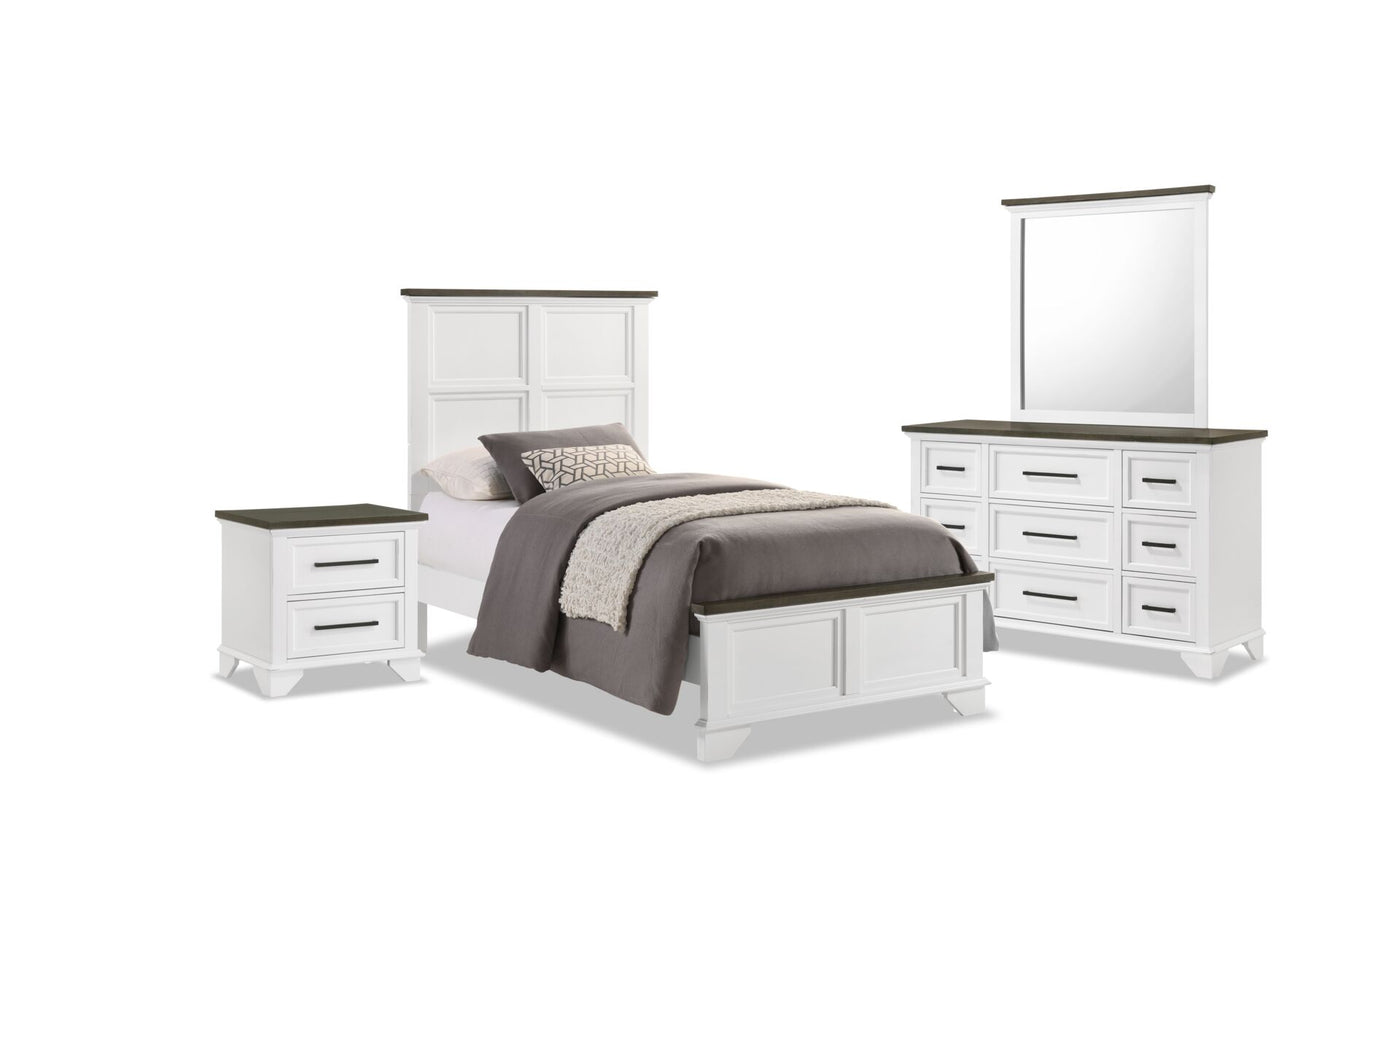 Abigail 6-Piece Twin Bedroom Package - White and Grey